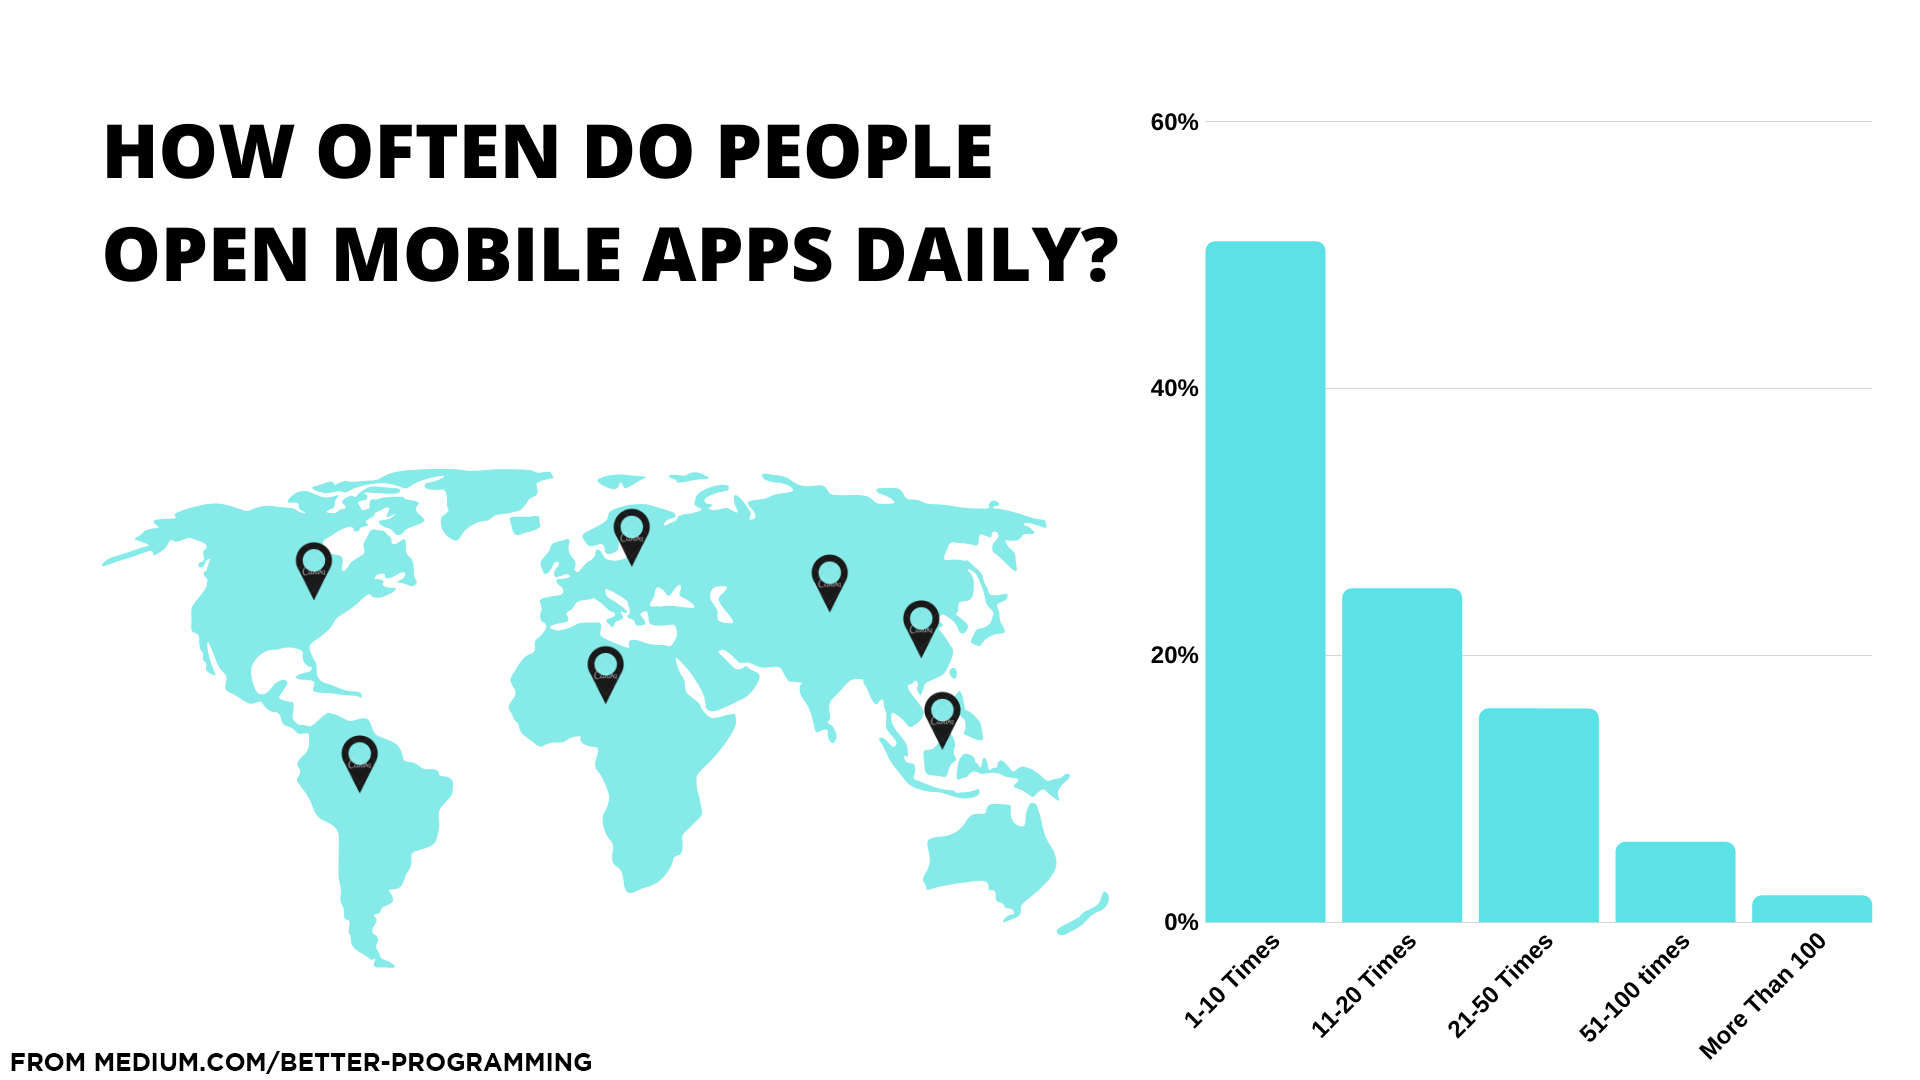 Mobile apps open daily